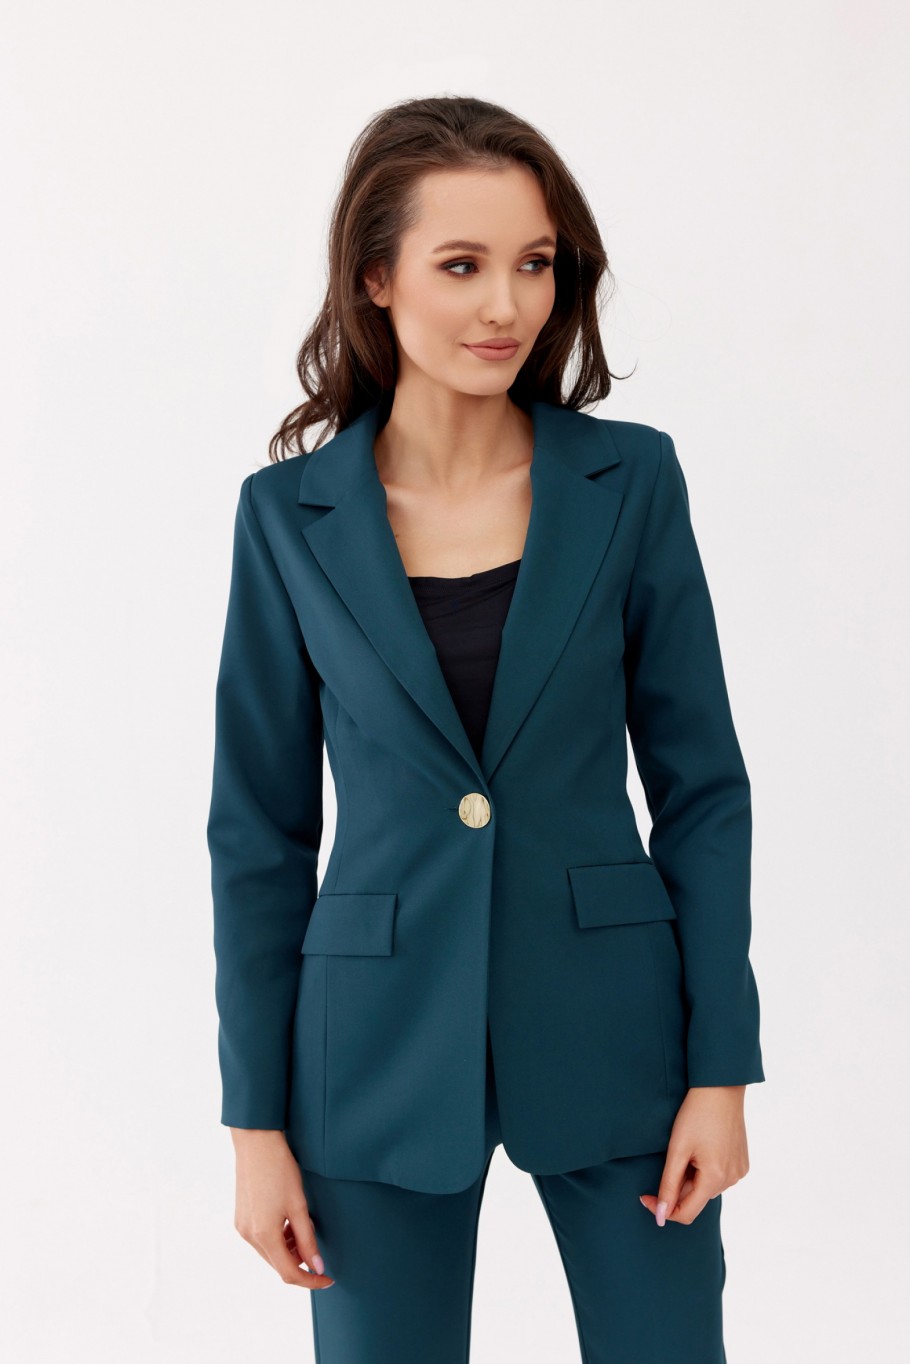 Aiden - women's jacket with a cinched waist BUT